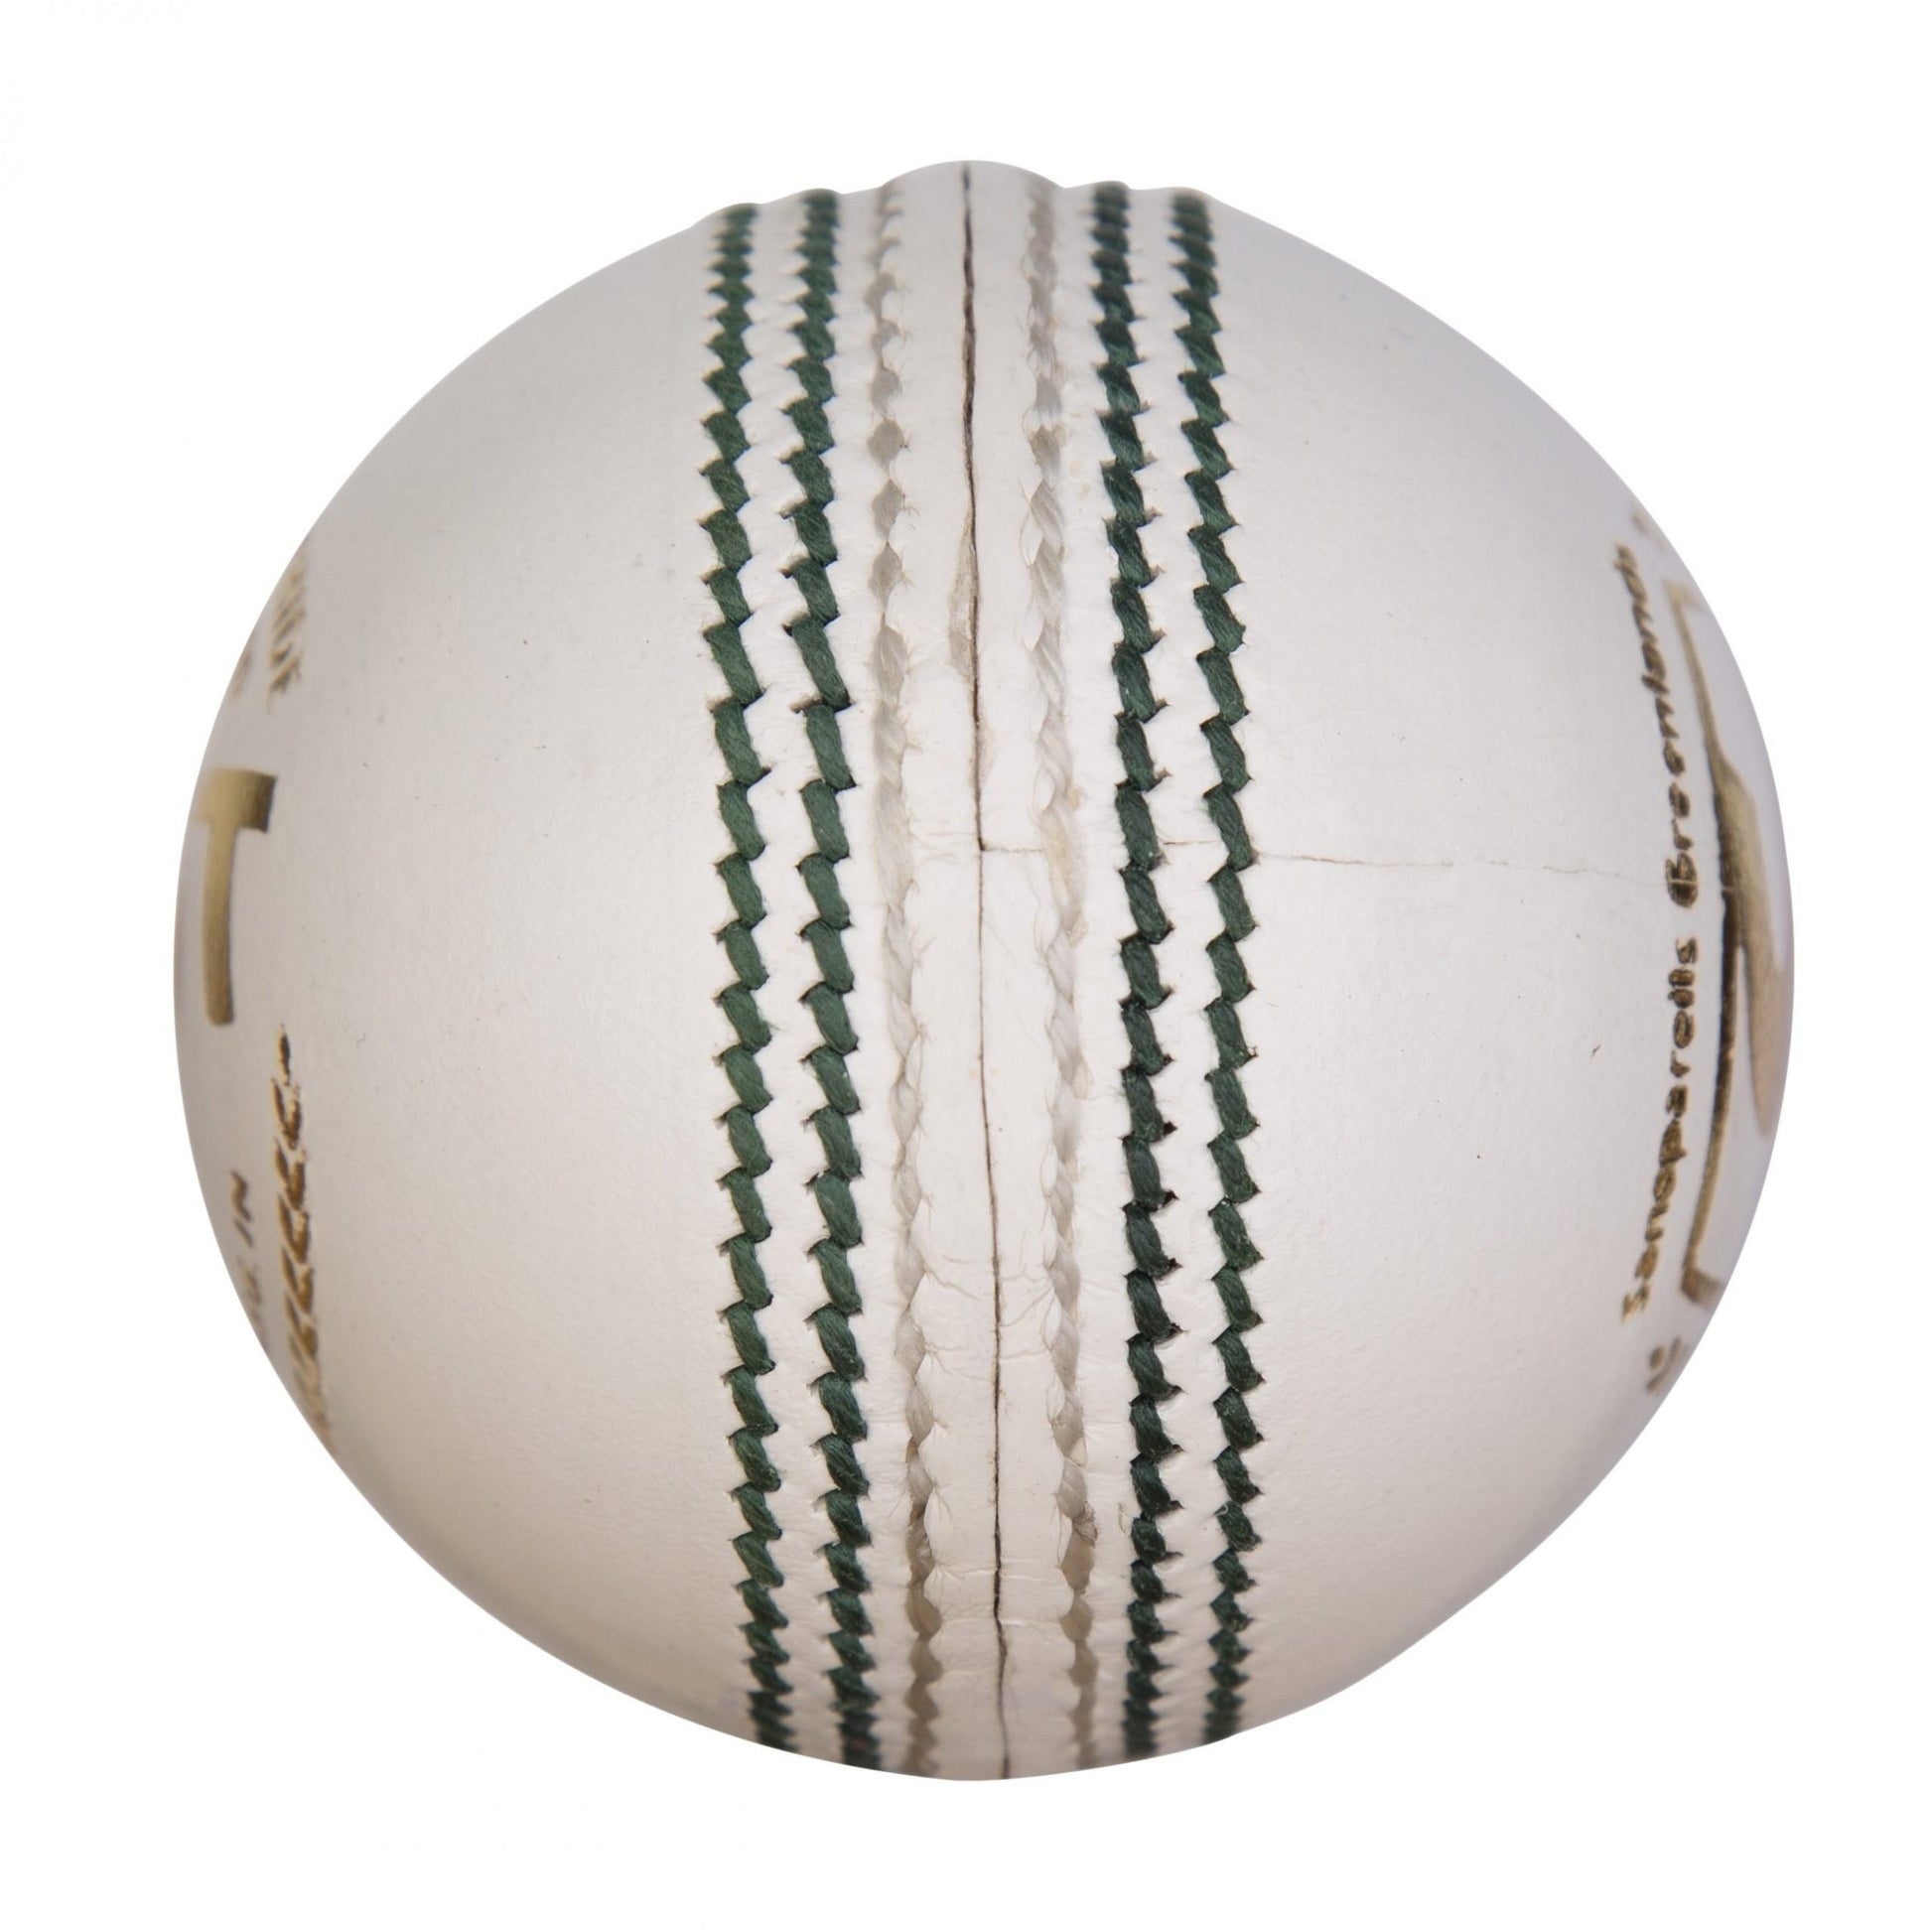 SG Test LE Most Premium Quality Four-Piece Cricket Leather Ball (White)